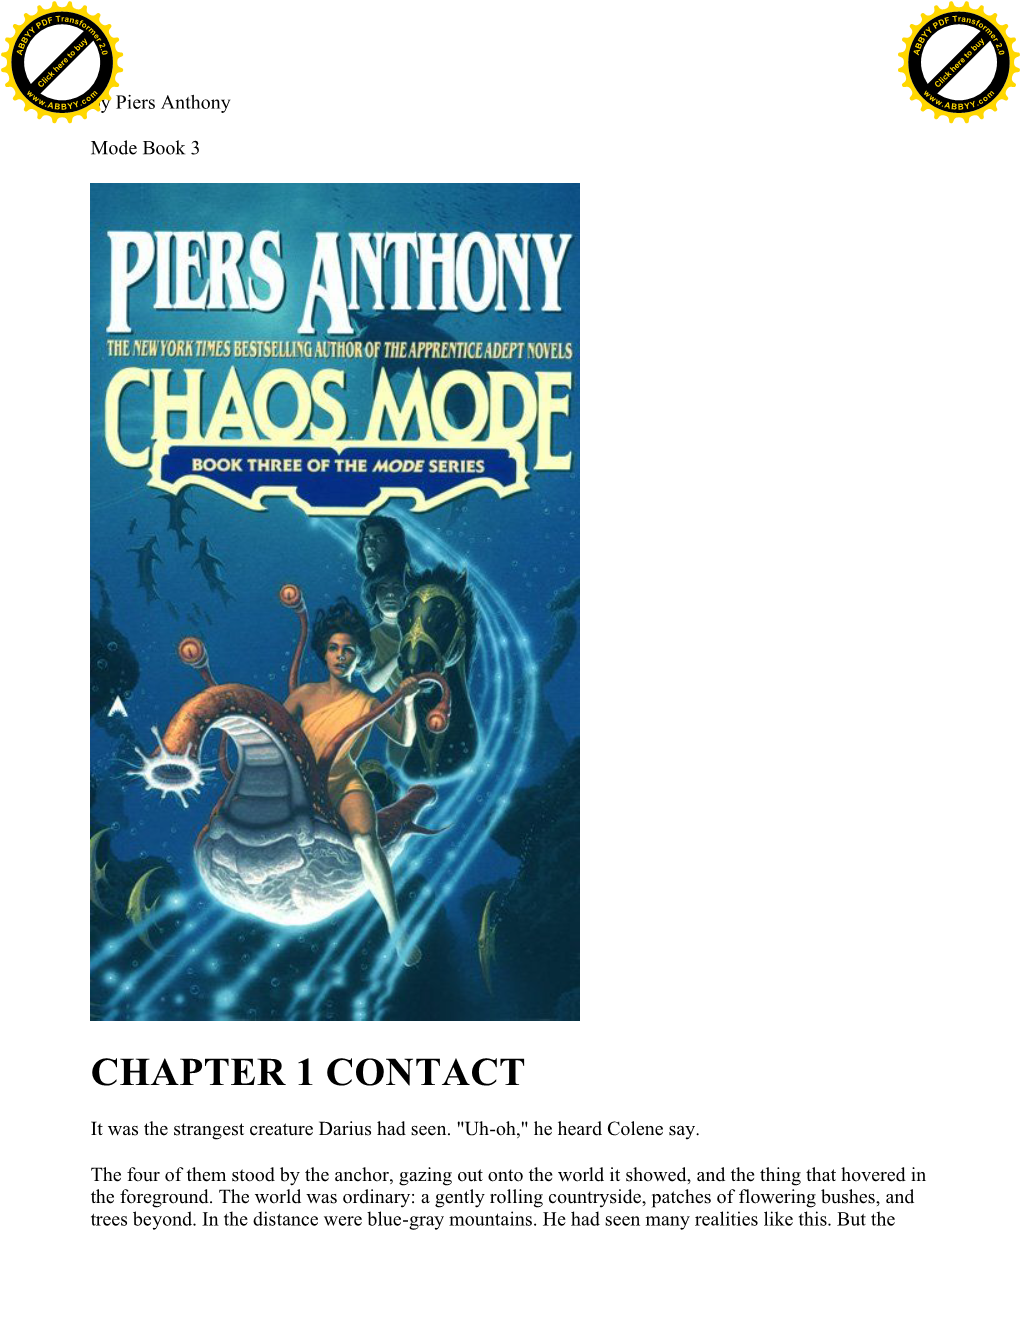 Chapter 1 Contact